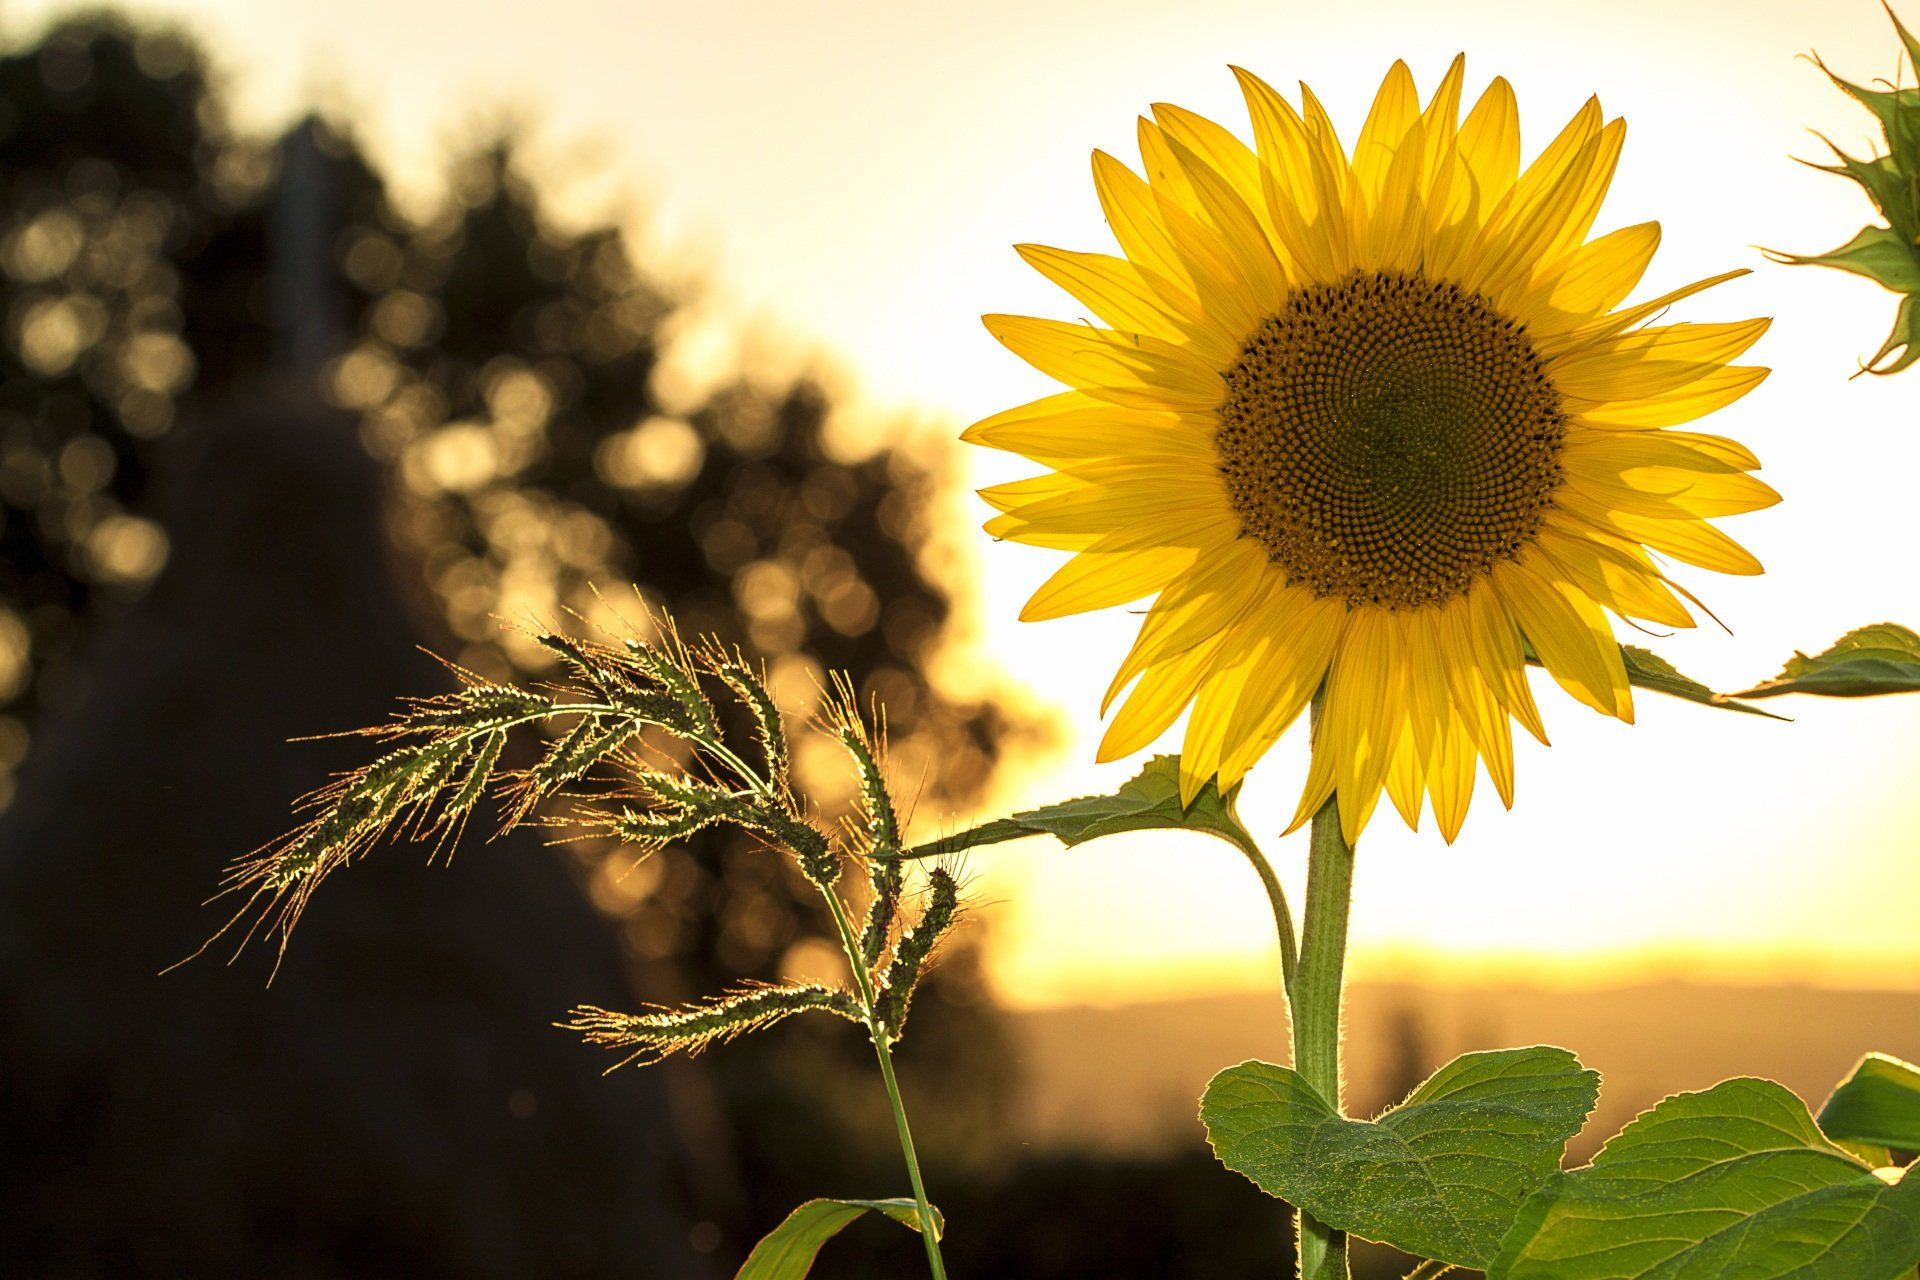 Sunflower in the sunshine (Finding Peace through Christ)